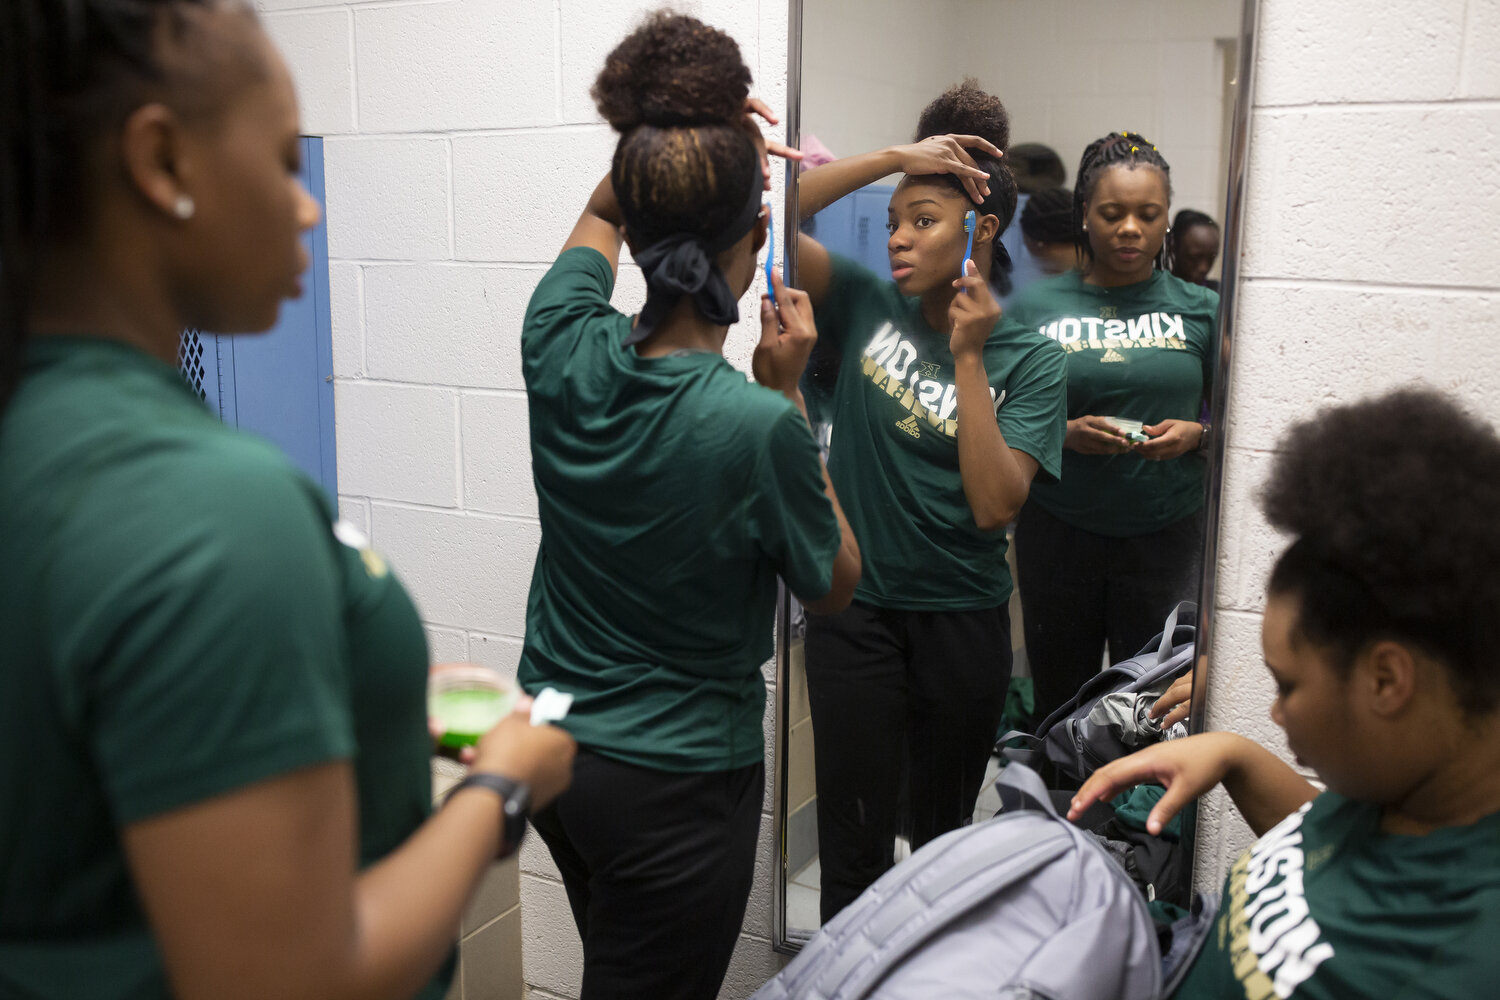  Senior Lesley Sutton, center, fixes her hair along with teammates Taliyah Jones, left, and Anzaryia Cobb, right, following a game.  